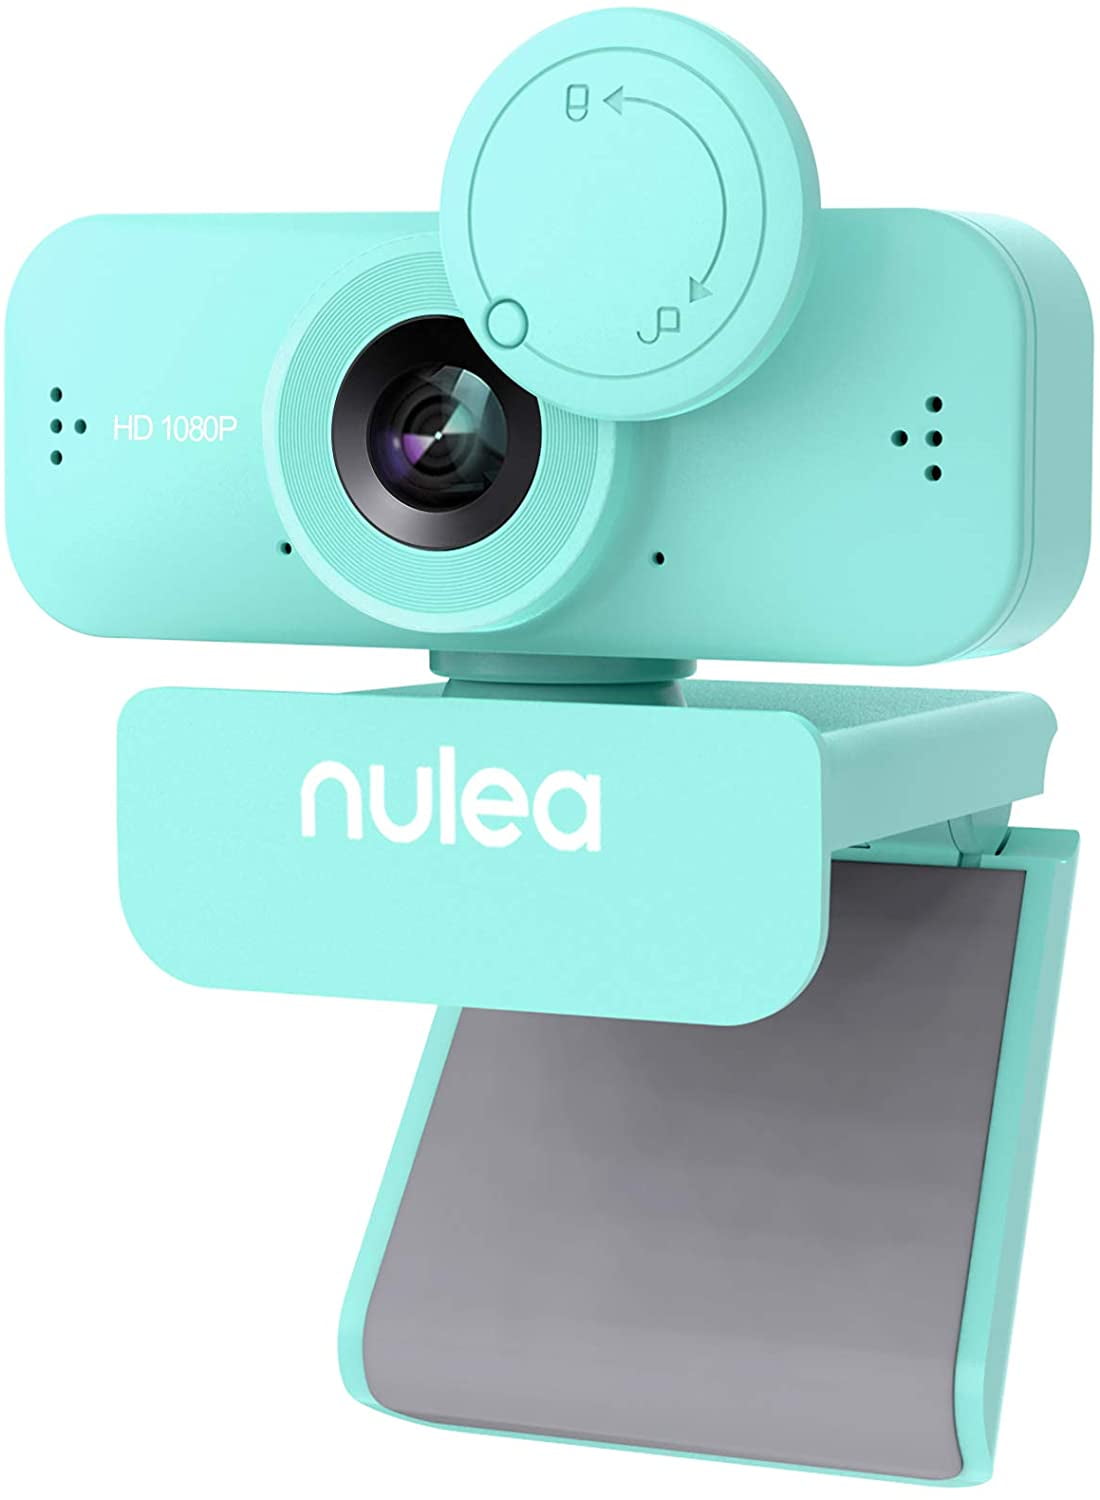 repeat Korean produce Nulea HD Webcam 1080P with Microphone for PC/Laptop Camera, Computer USB  Camera with Privacy Cover for Video Calling, Online Classes, Conference,  Works with Skype, Zoom, Facetime - Walmart.com